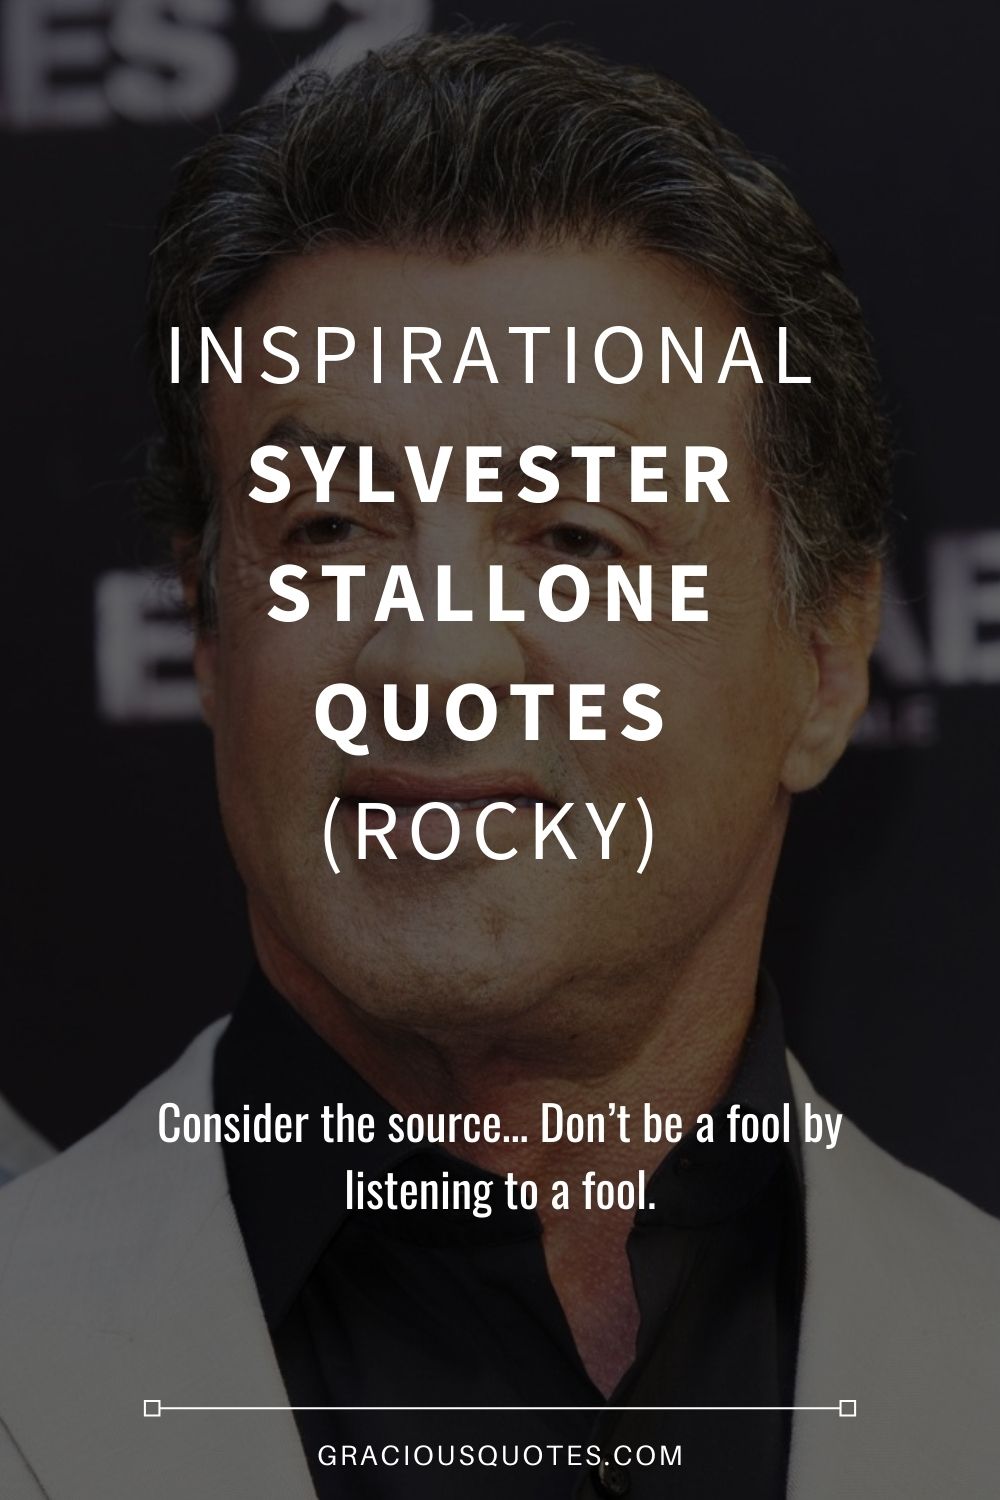 Inspirational Sylvester Stallone Quotes (ROCKY) - Gracious Quotes